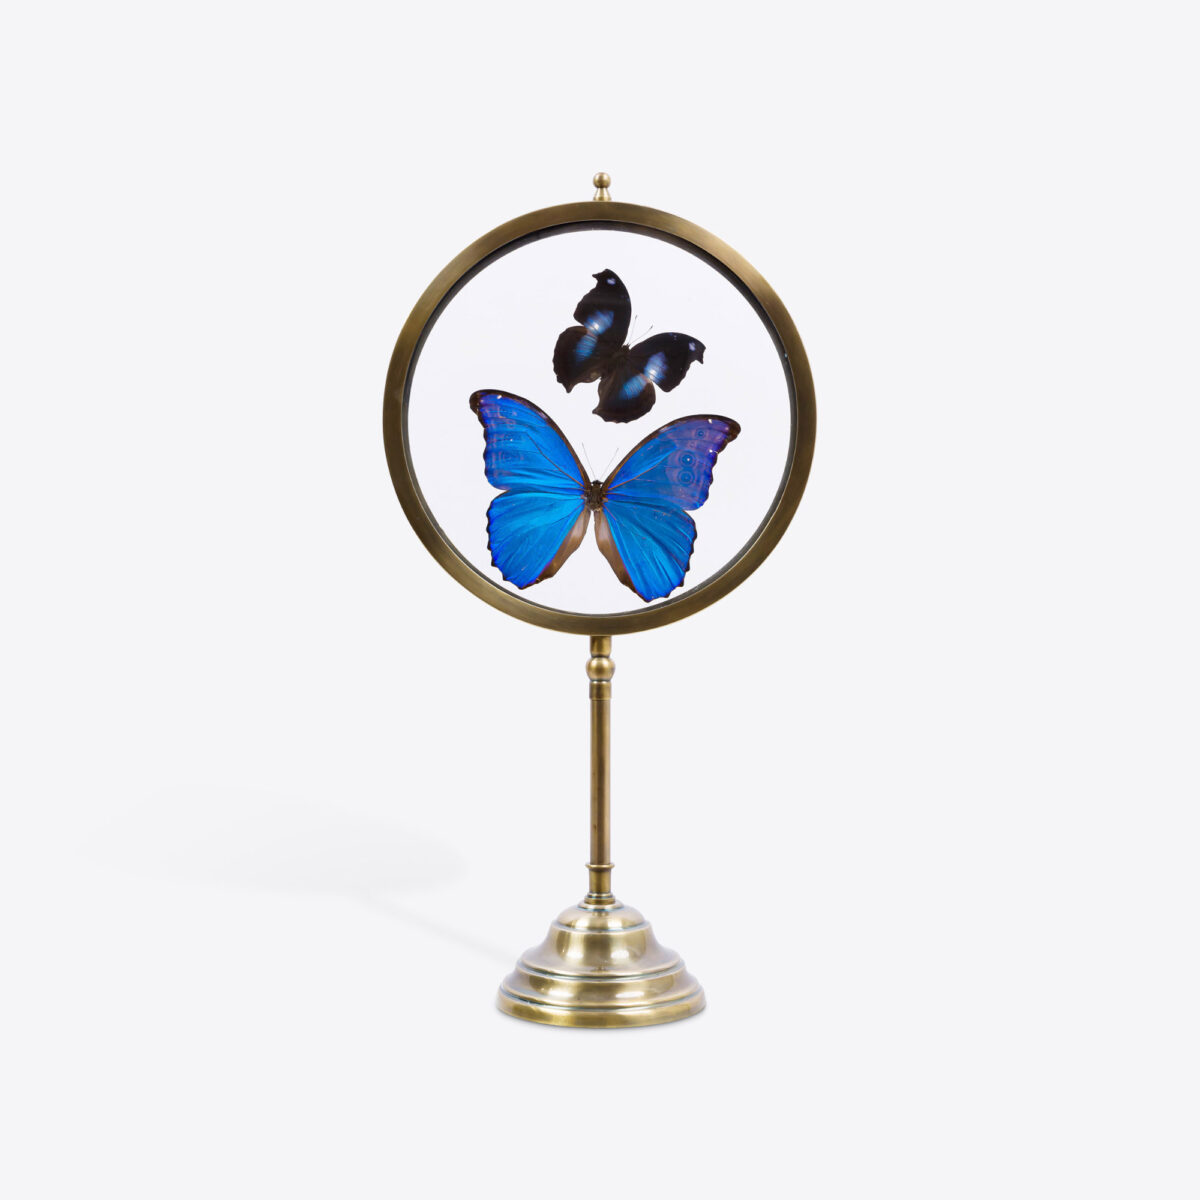 Large Blue and Black Butterfly Looking Glass